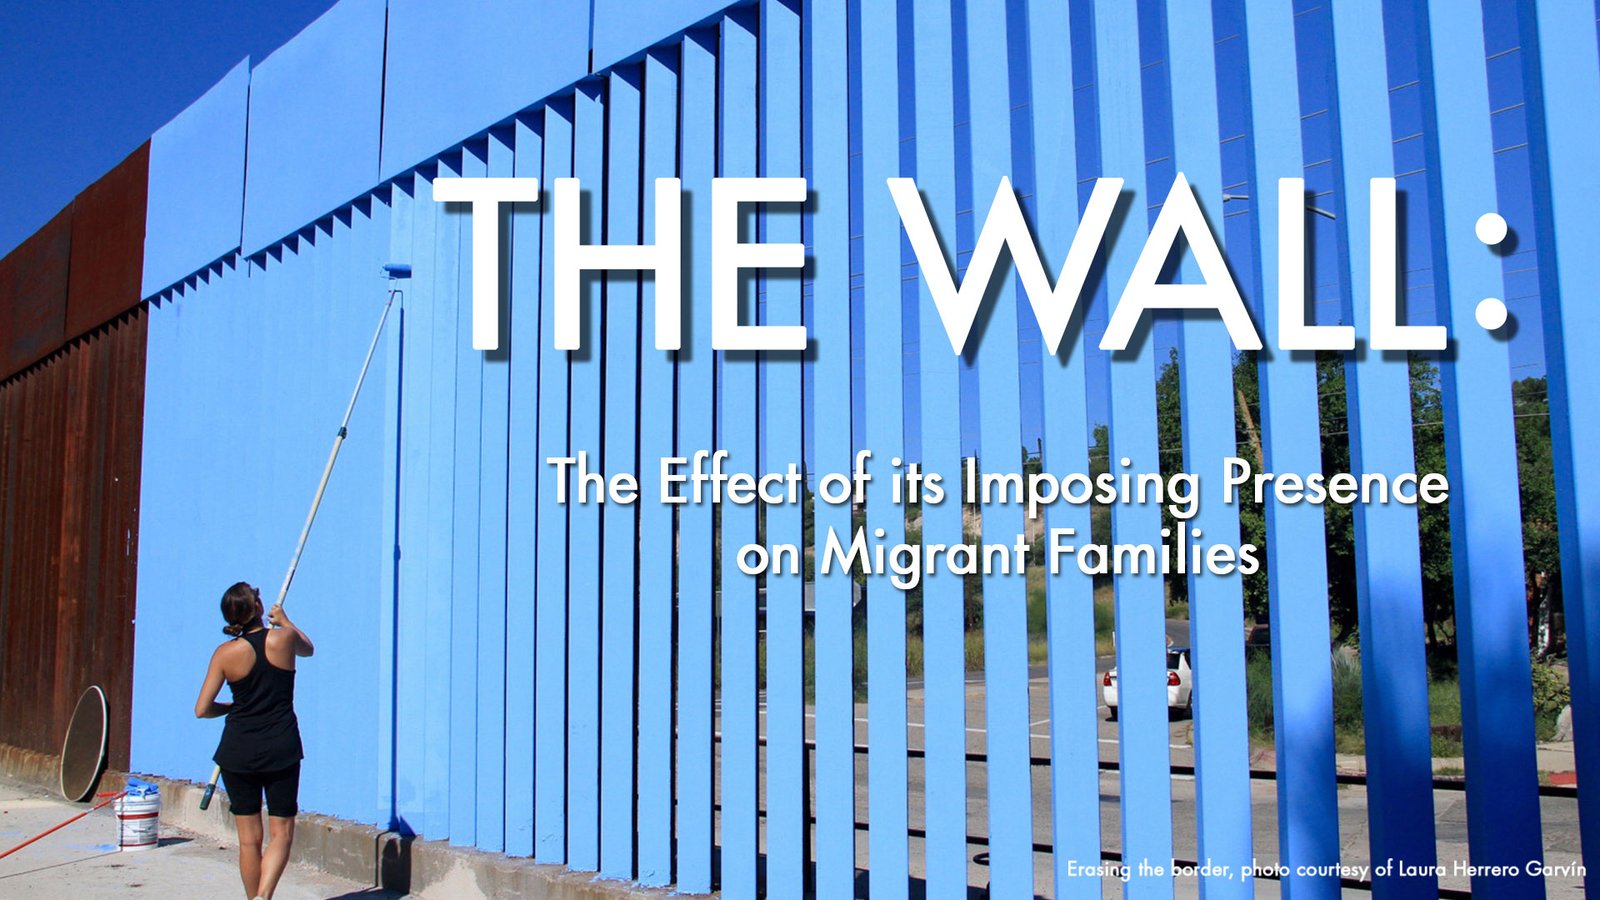 The Wall - Short Documentaries on the Undocumented Immigration Crisis